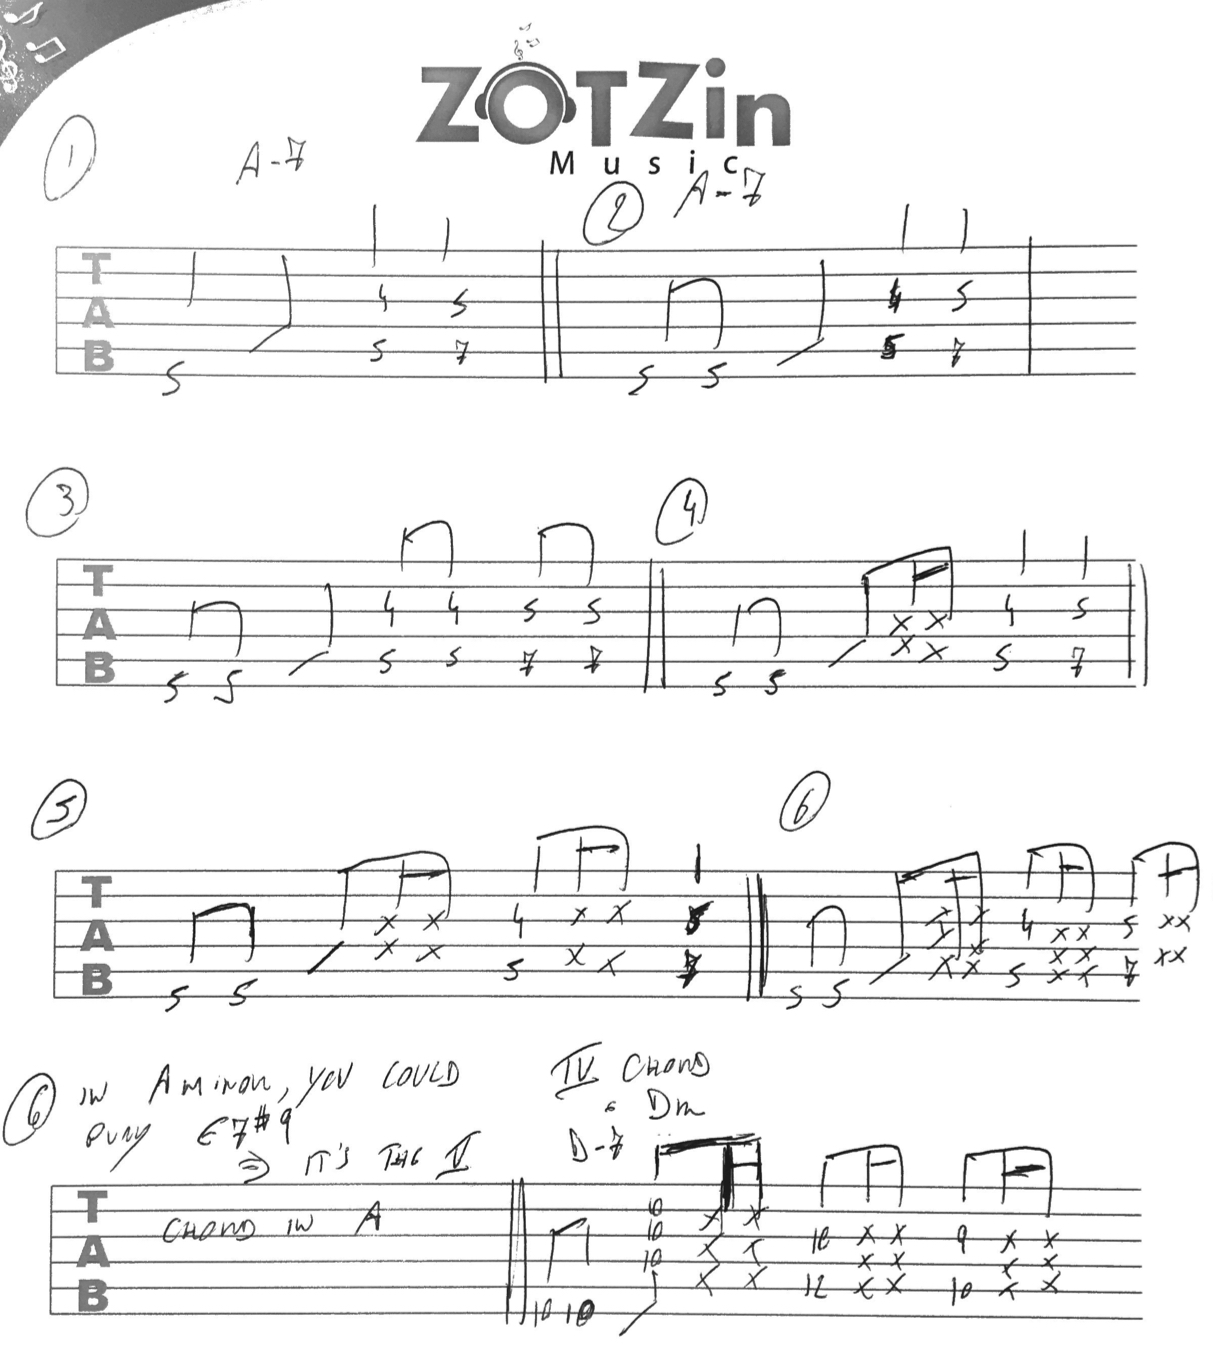 7 rhythm exercises you will love playing. 